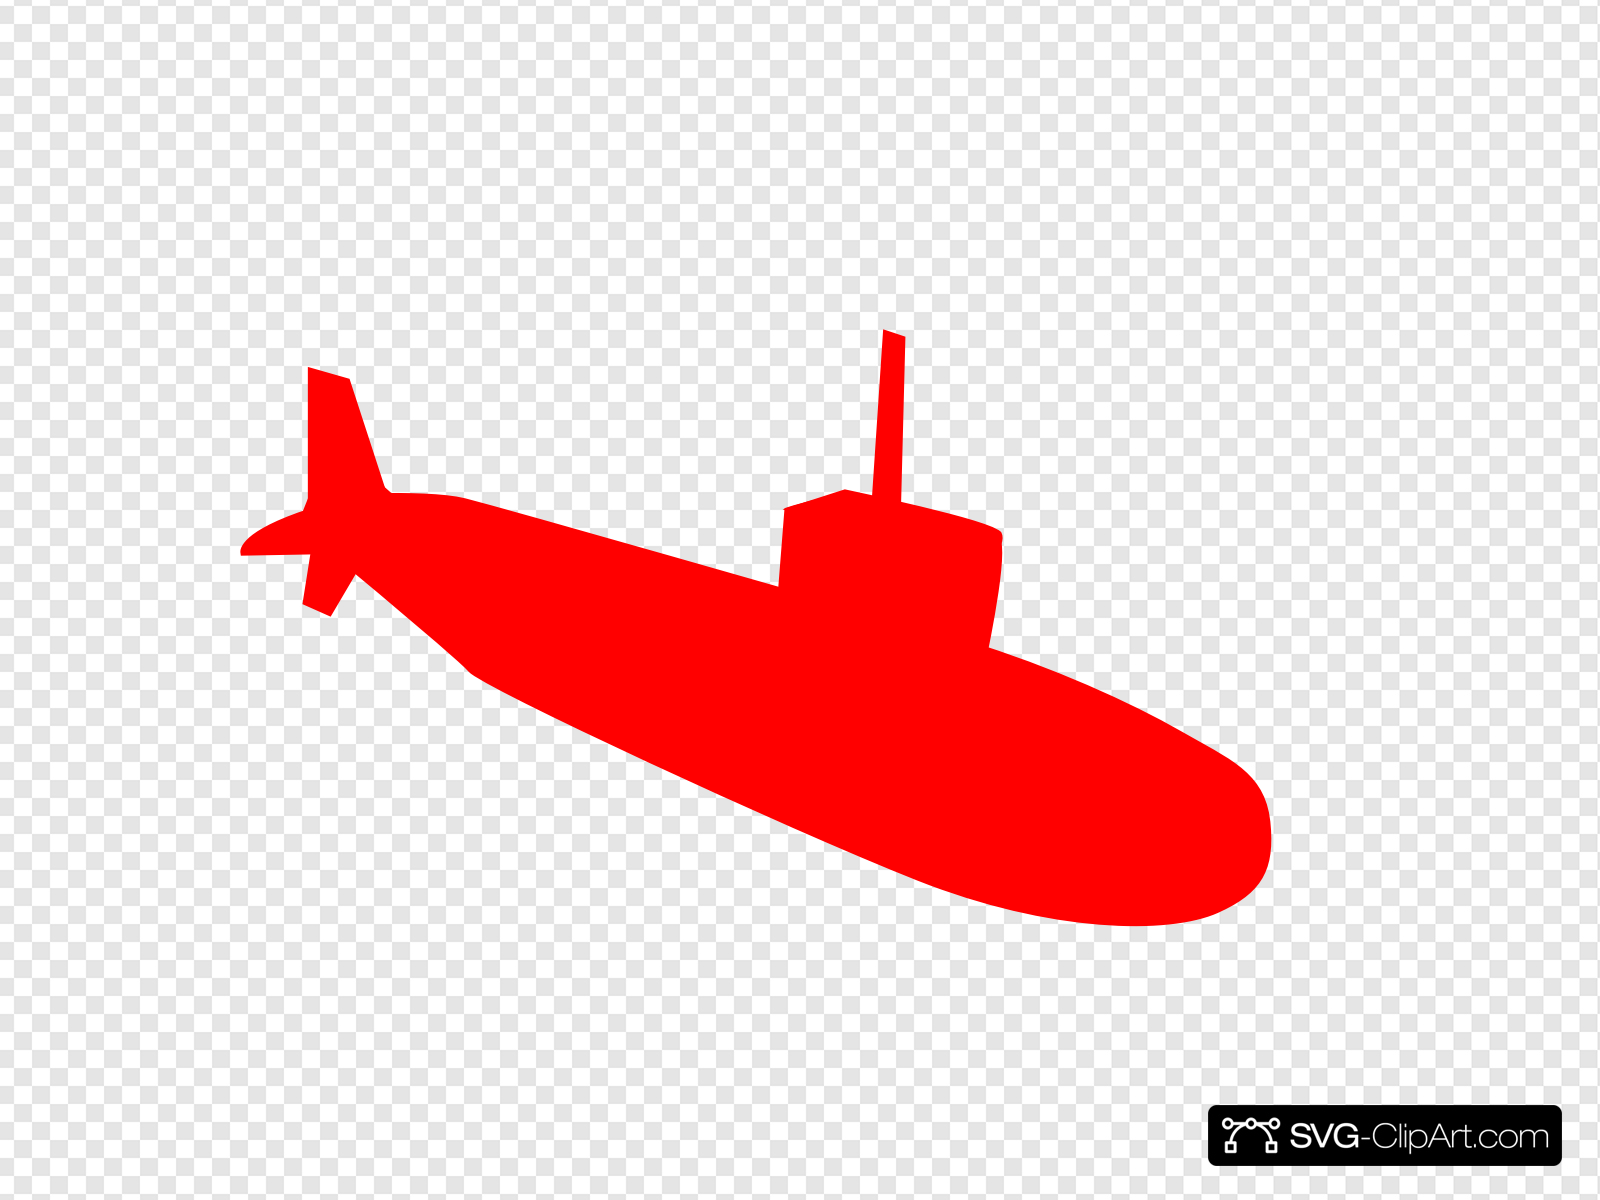 Clip art icon and. Submarine clipart red